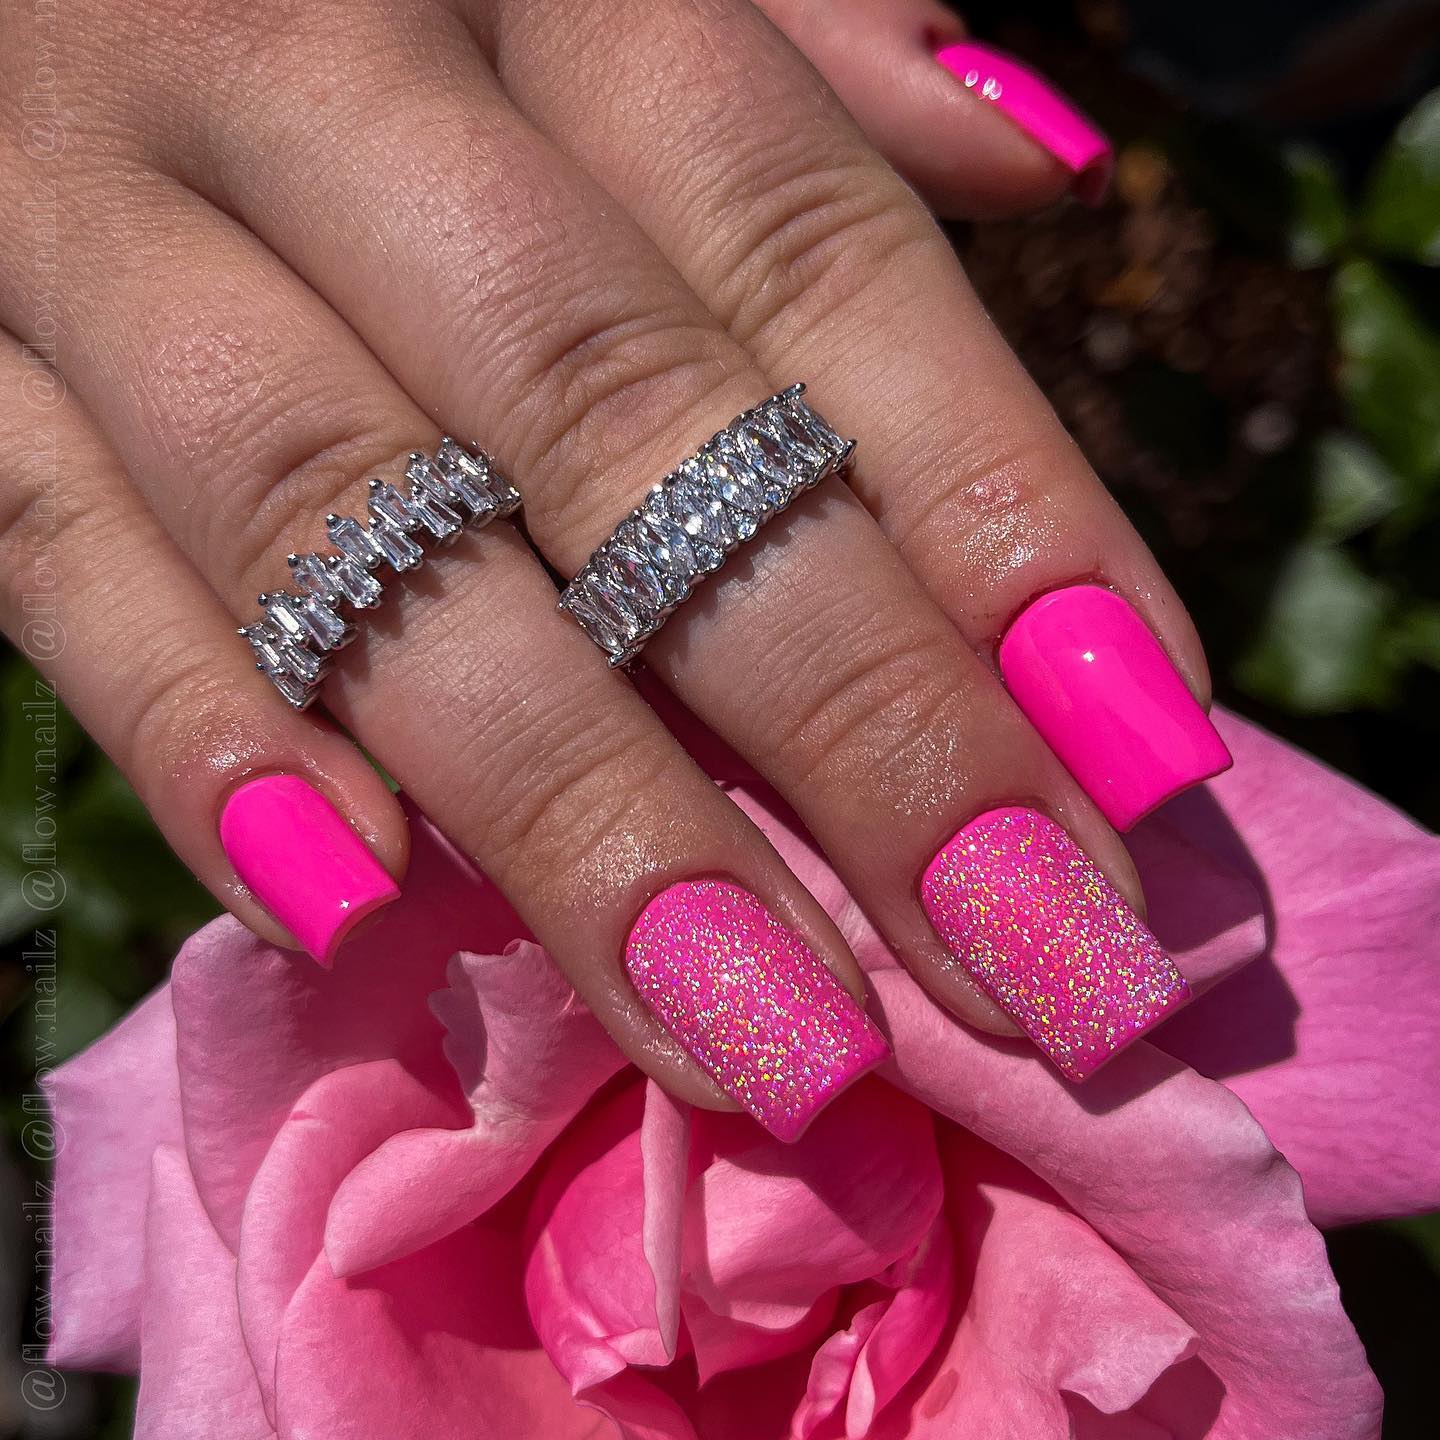 56 Pink Nails Designs: Express Your Style Through Gorgeous Nails